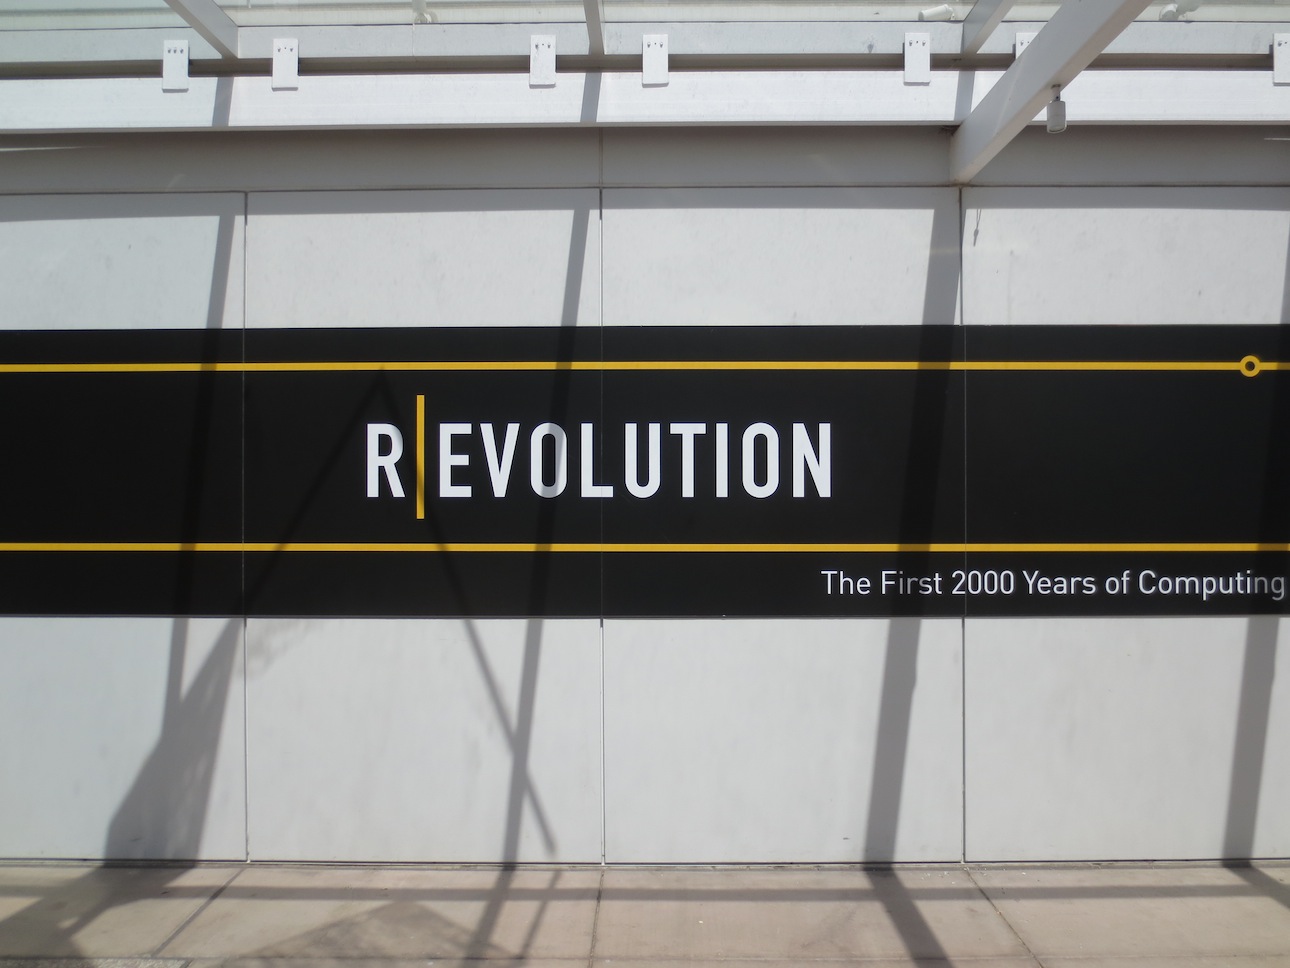 Revolution. The current theme for the Computer History Museum.